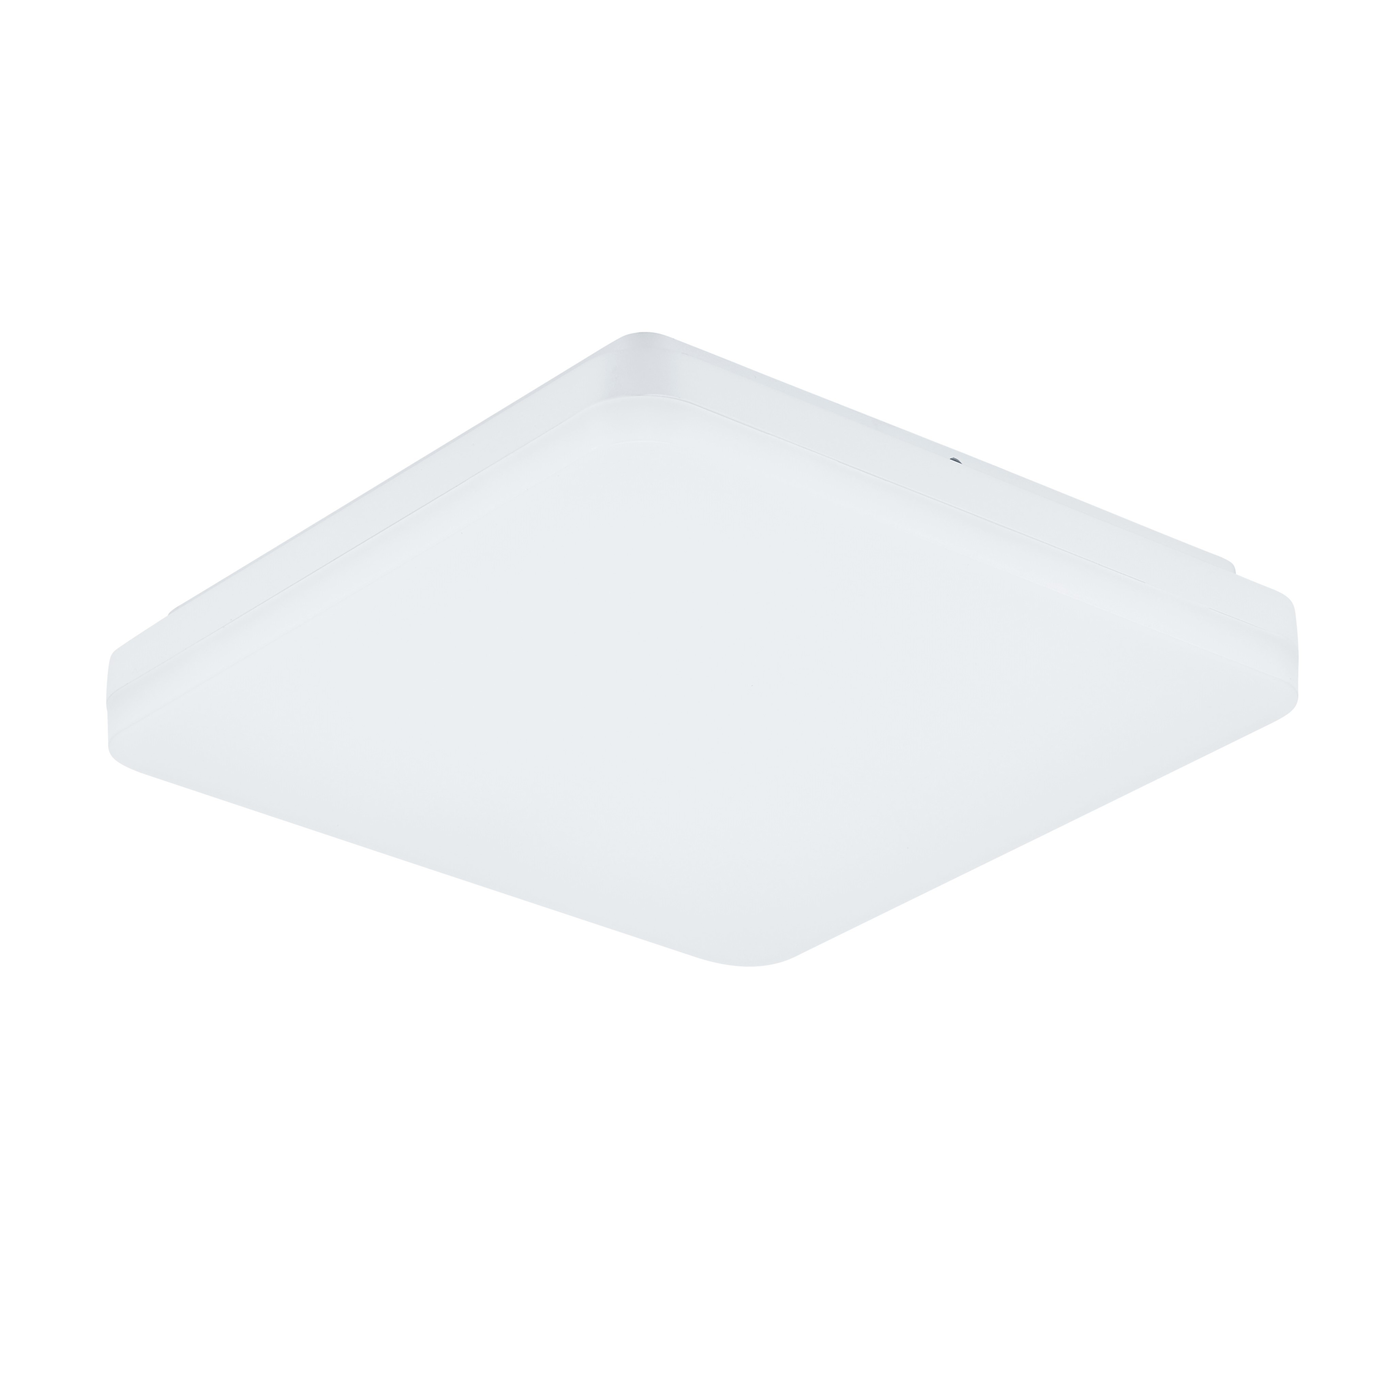 Anbauleuchte LED SLICE SQUARE III weiss, 18W, 3000K, IP20, NOT